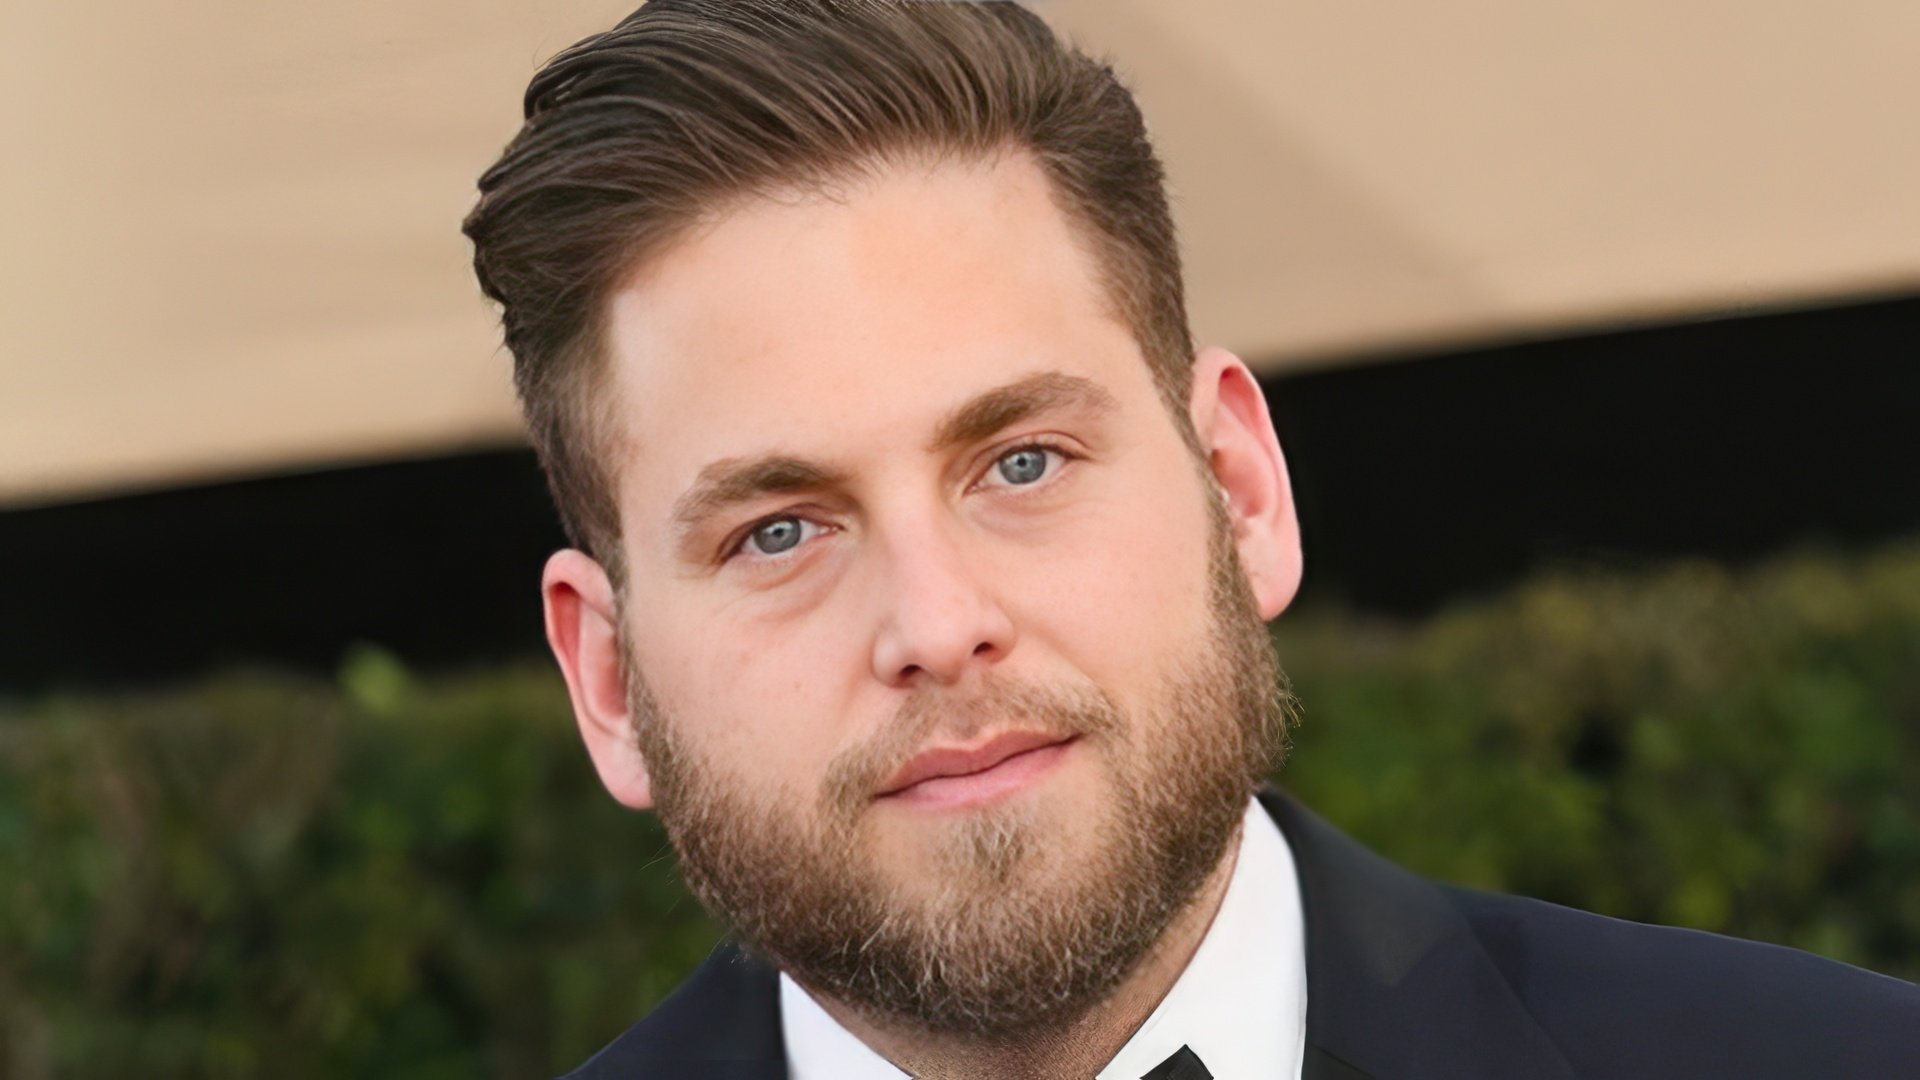 In the photo: Jonah Hill